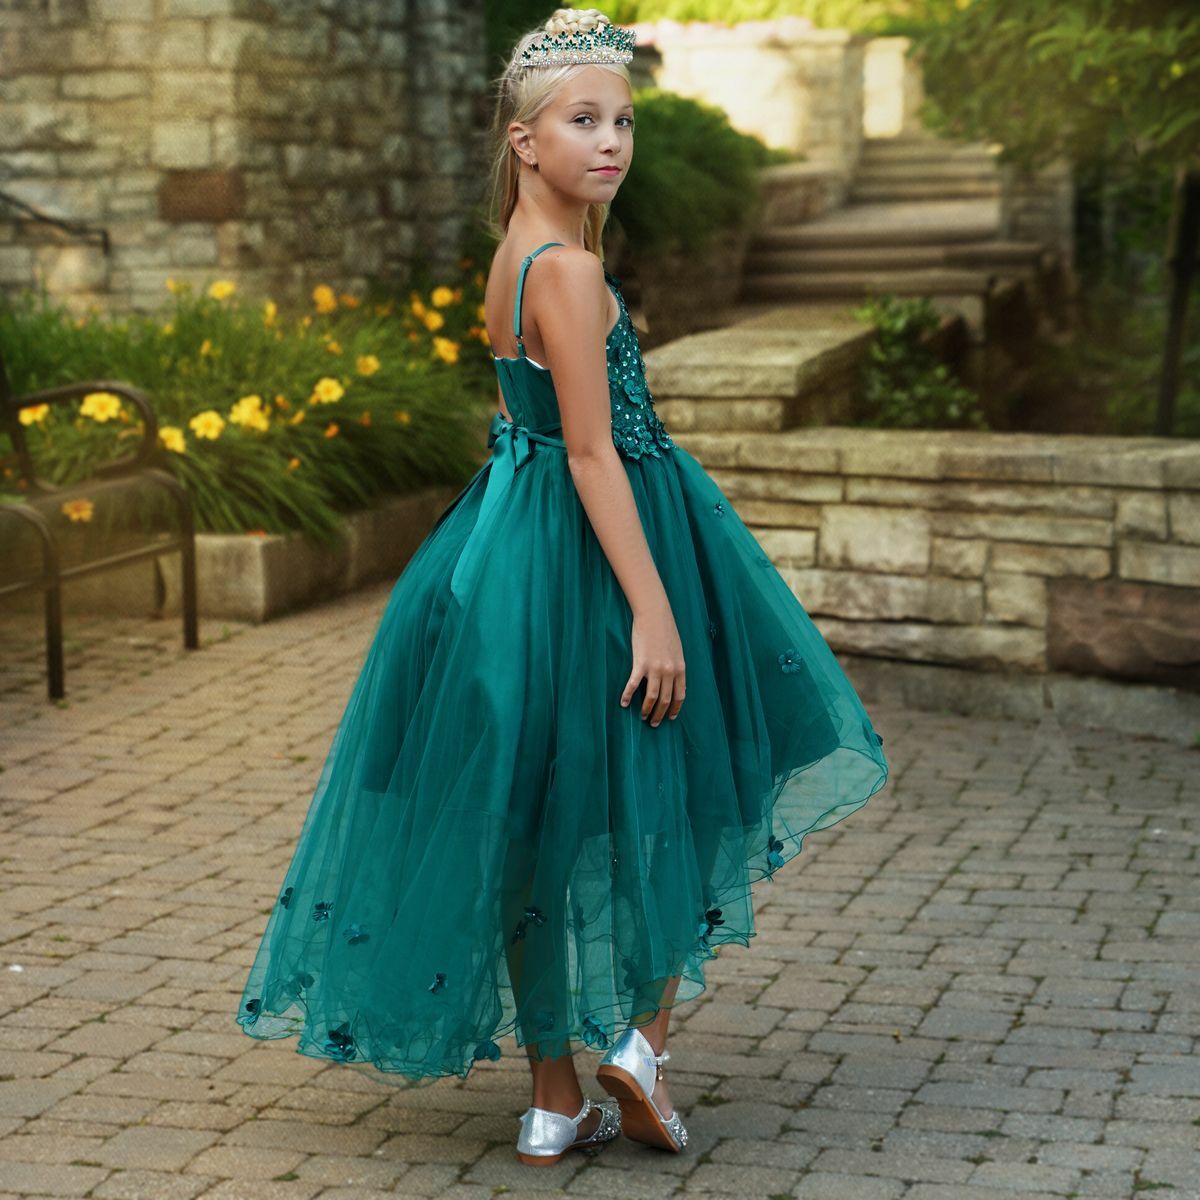 Helping Your Little Girl Develop Her Own Sense of Style